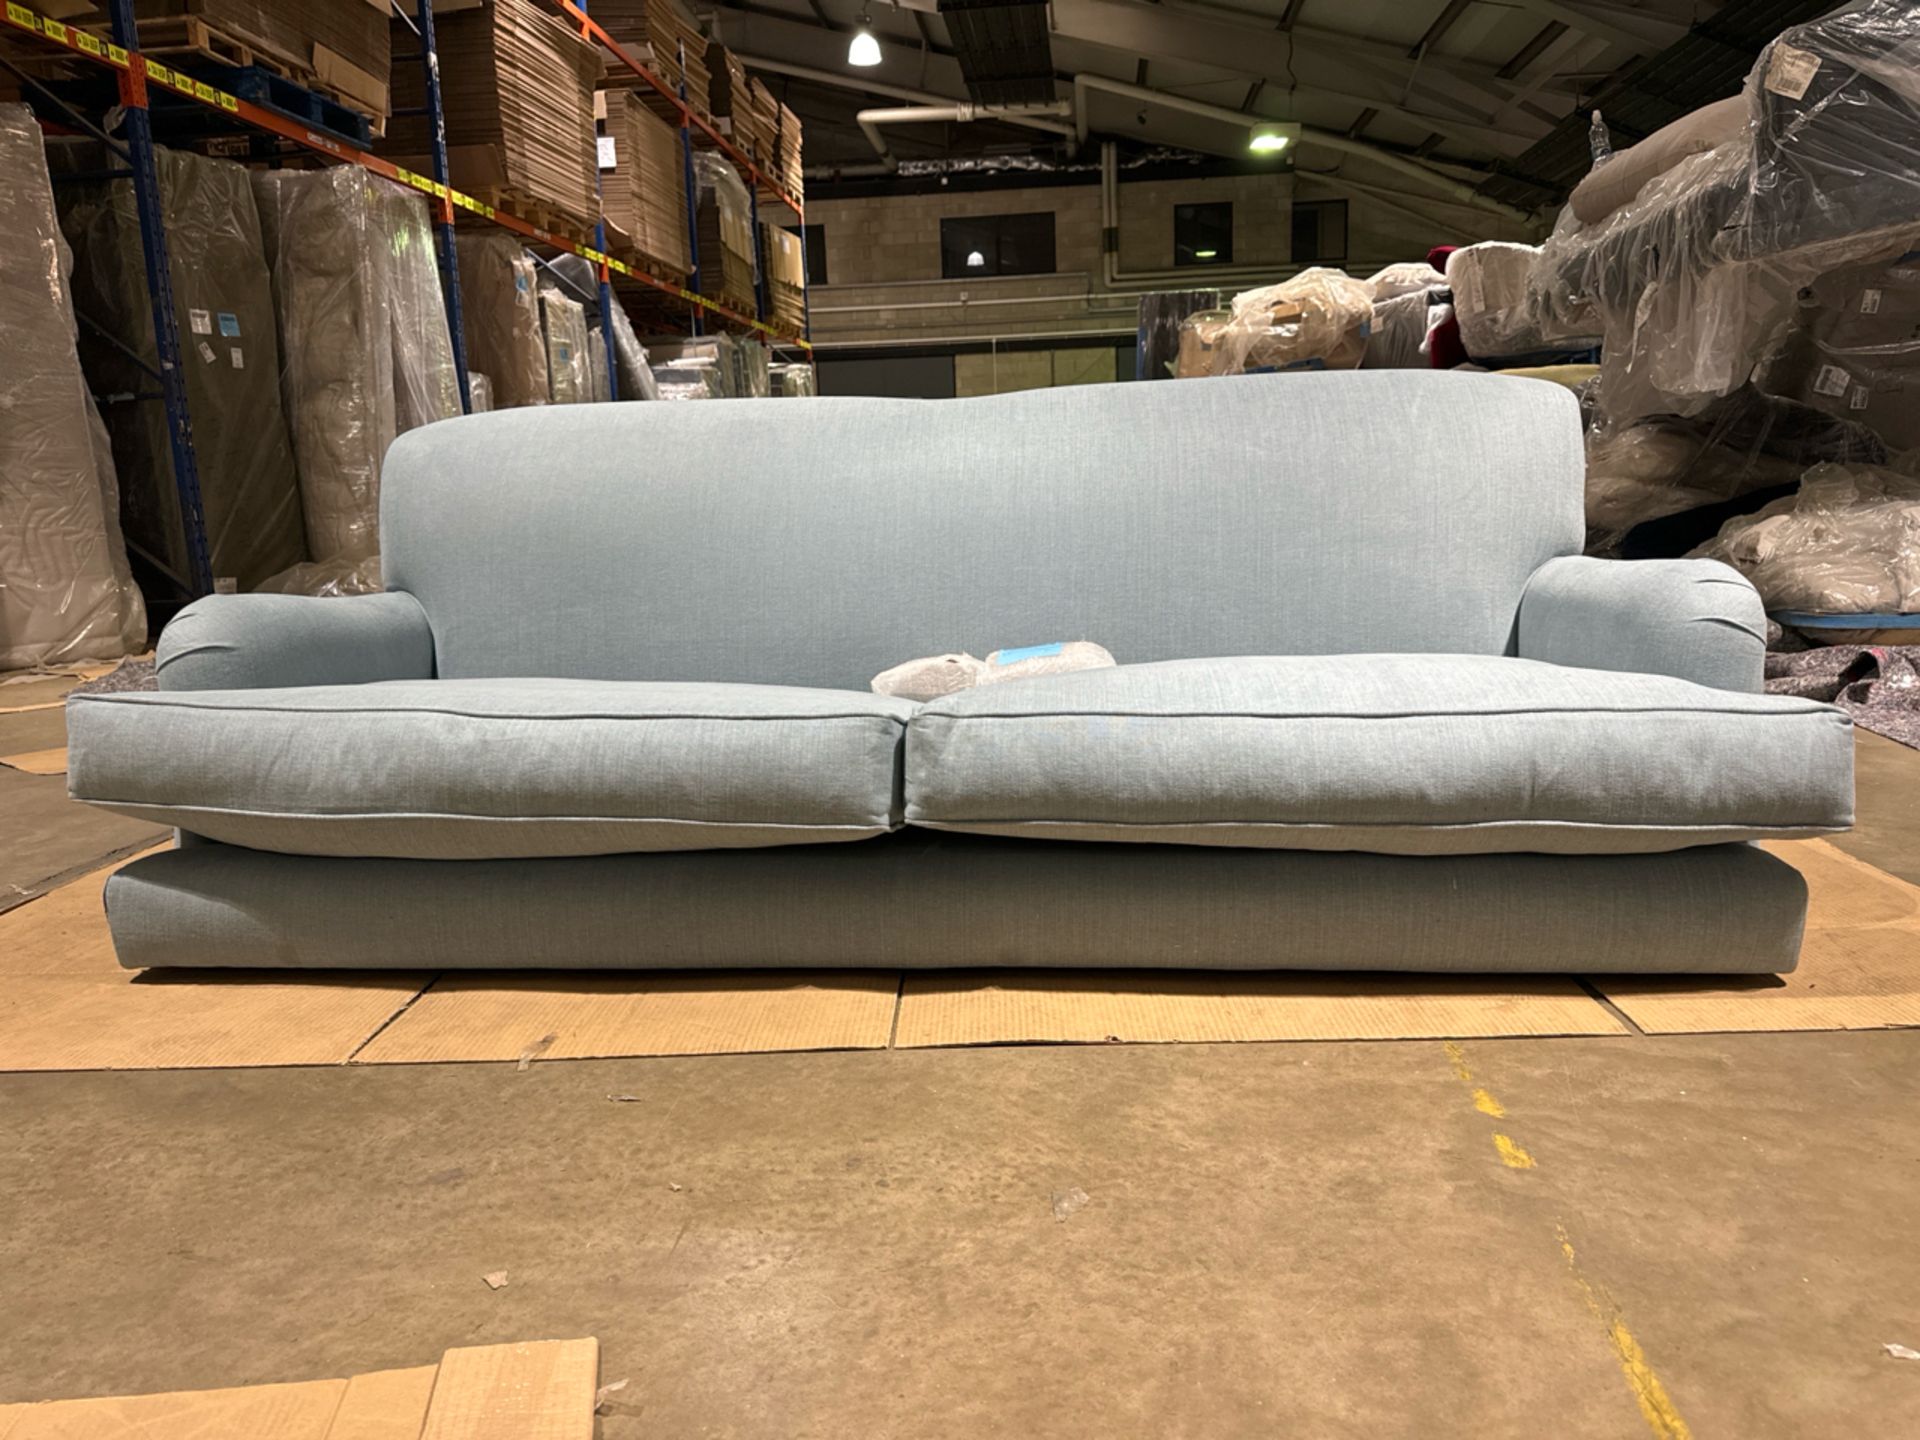 Snowdrop 3 Seat Sofa In Lagoon Brushed Linen Cotton RRP - £1870 - Image 2 of 6